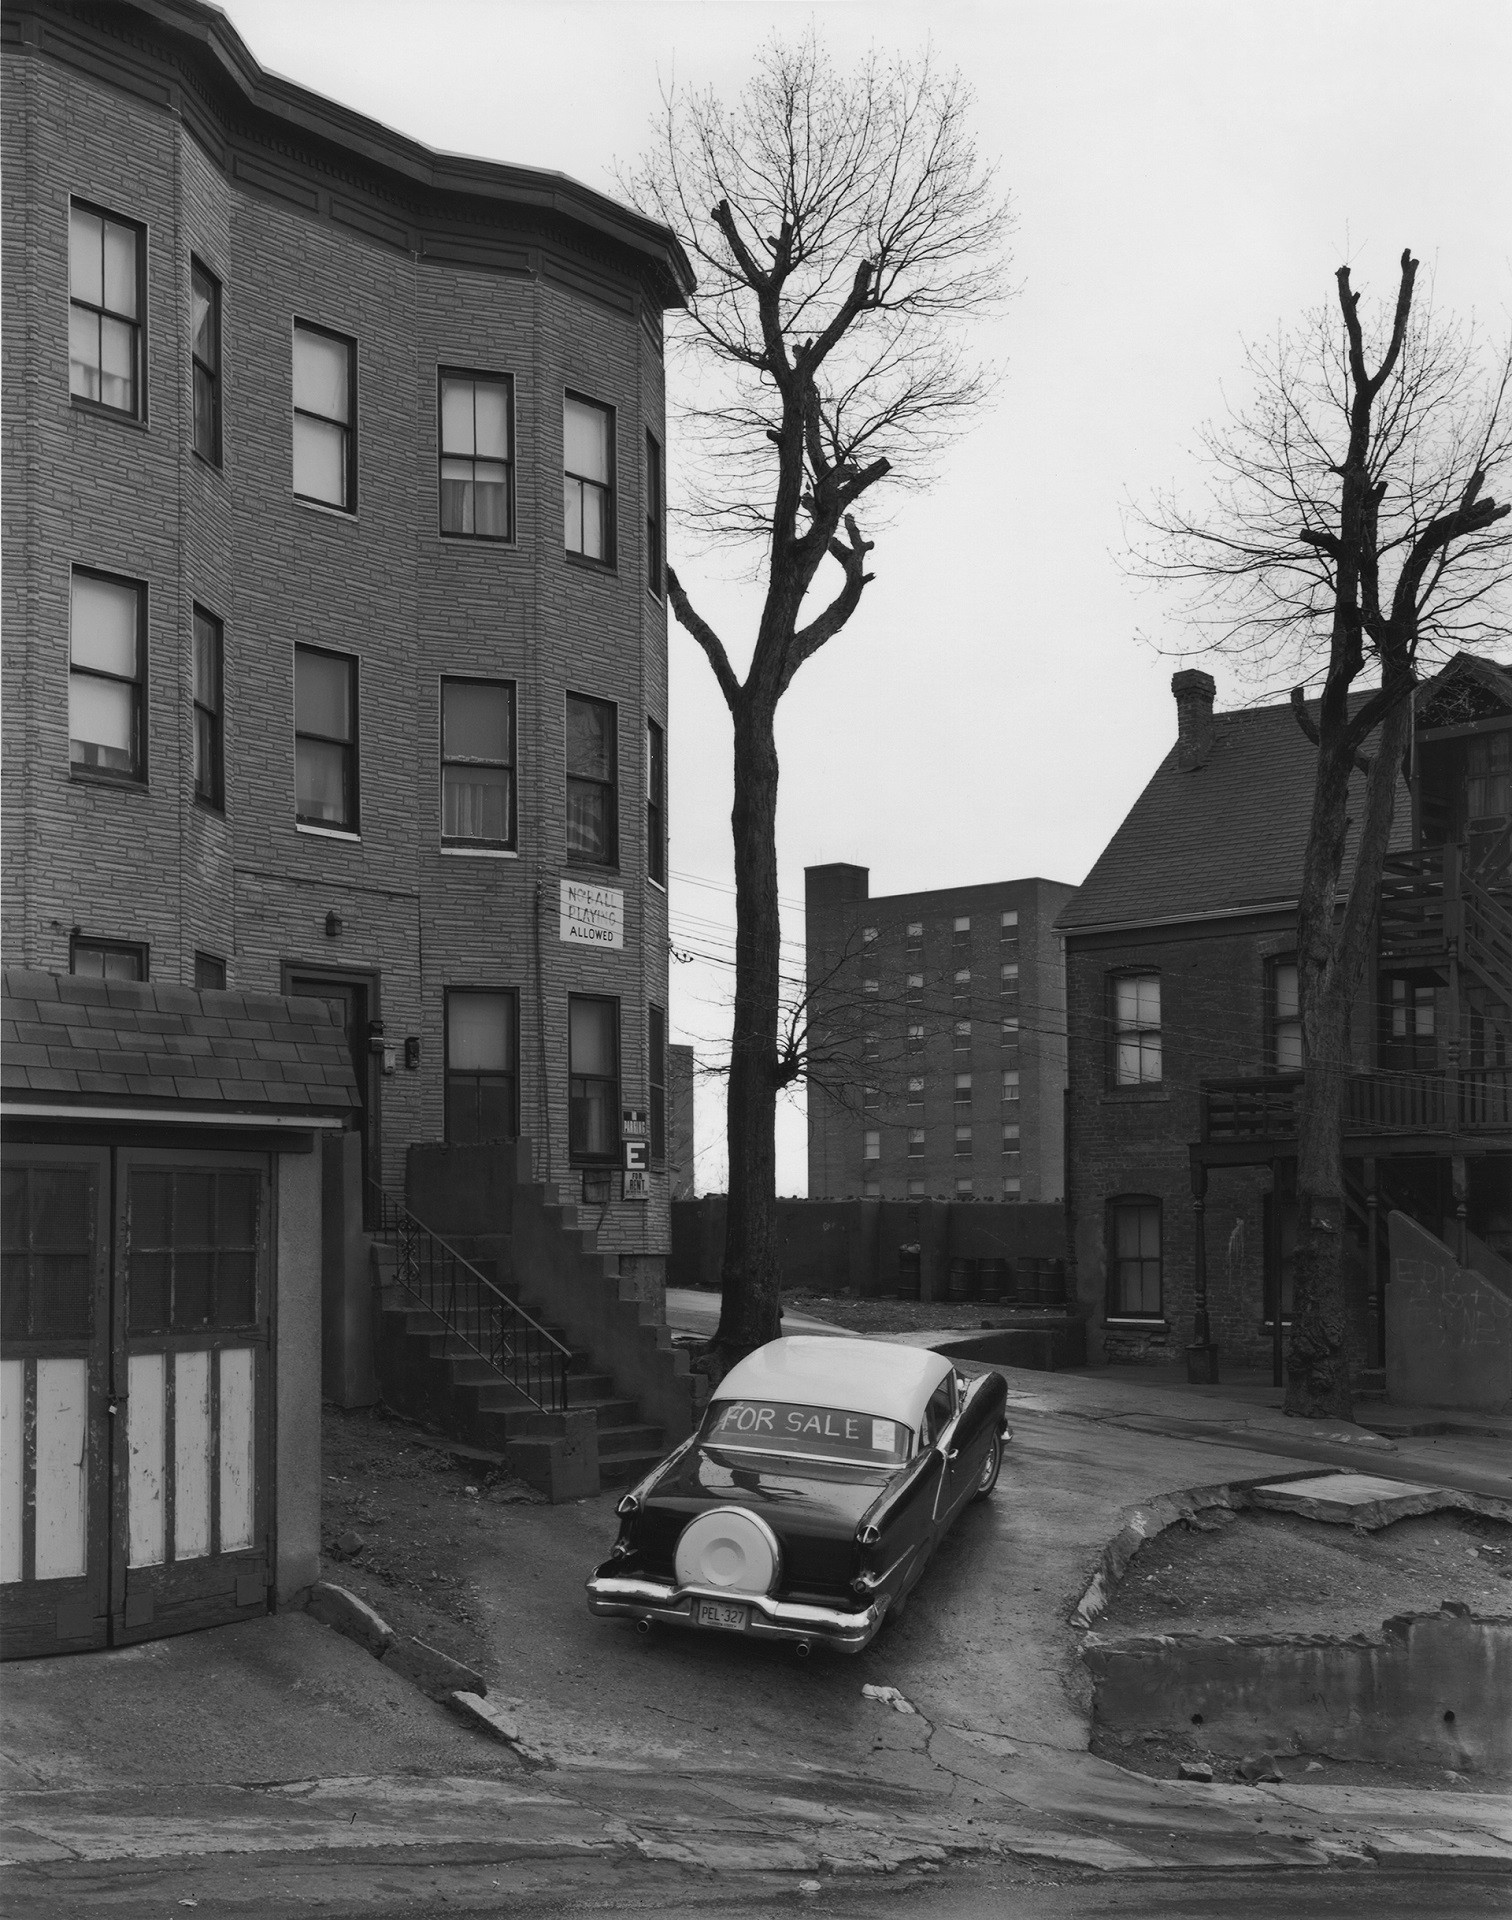 Car for sale in an american suburb photographed in black and white by George Tice.